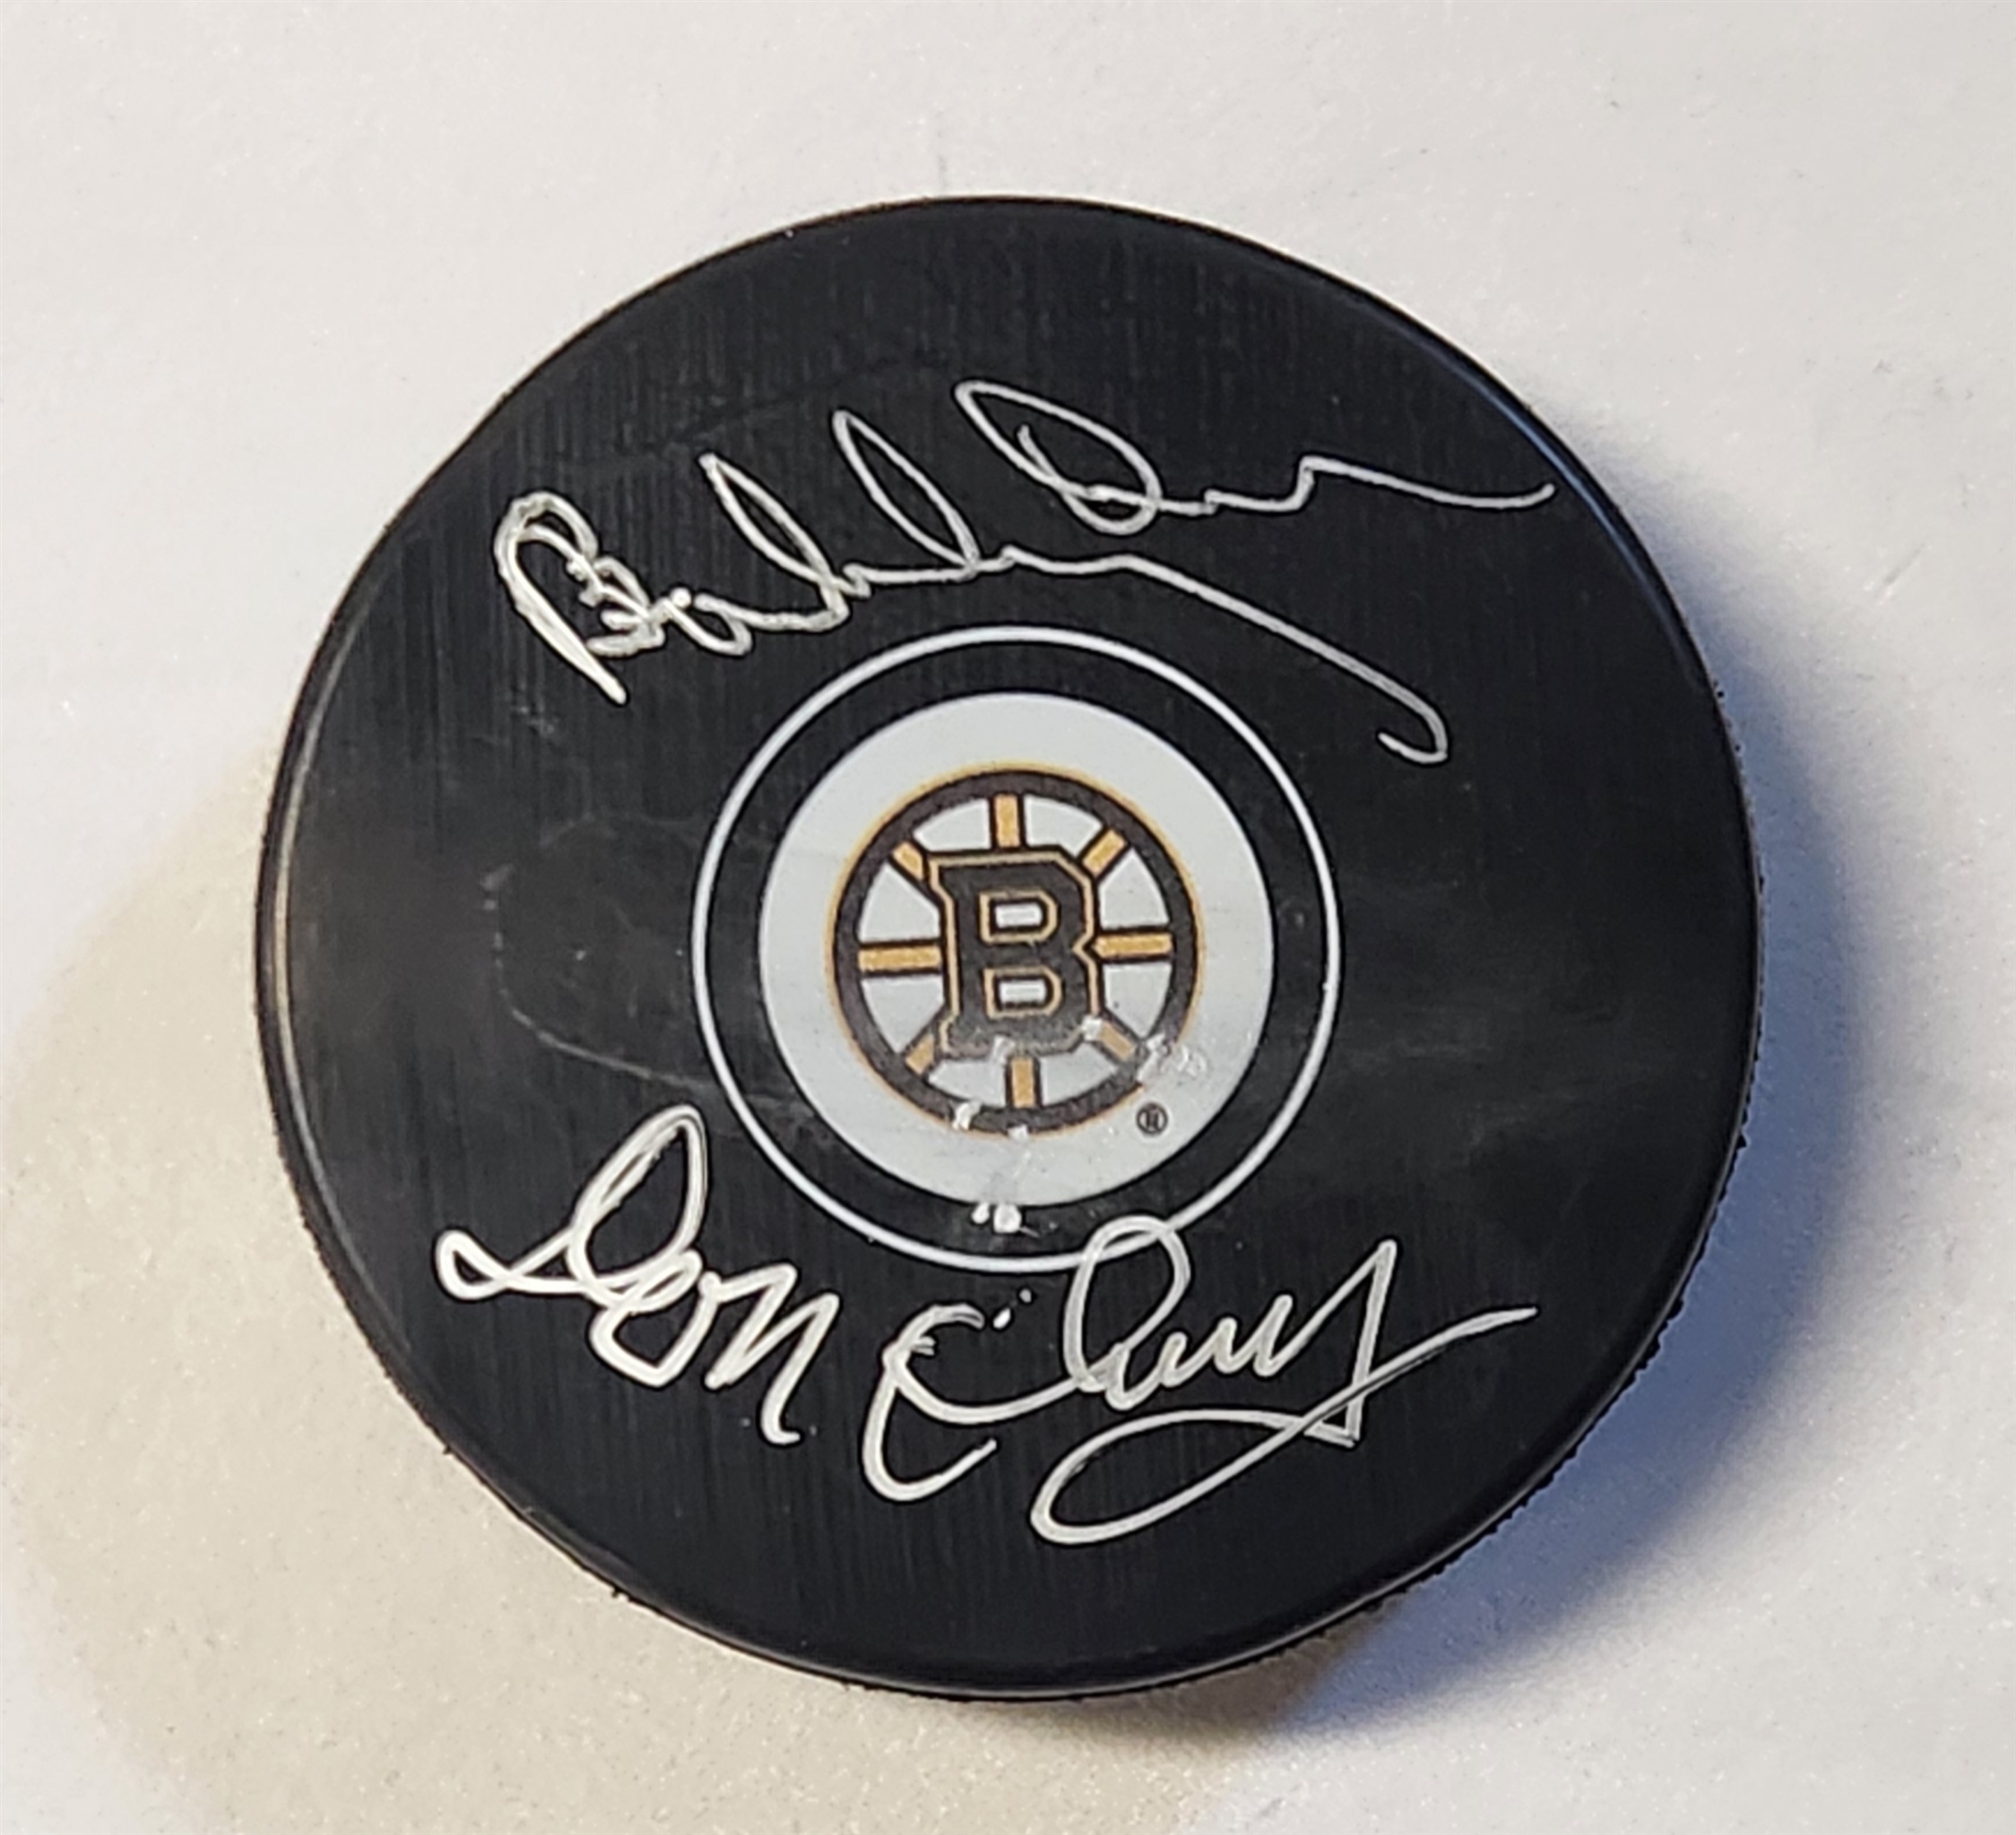 Bobby Orr & Don Cherry Dual Signed Boston Bruins Hockey Puck (Flawed)